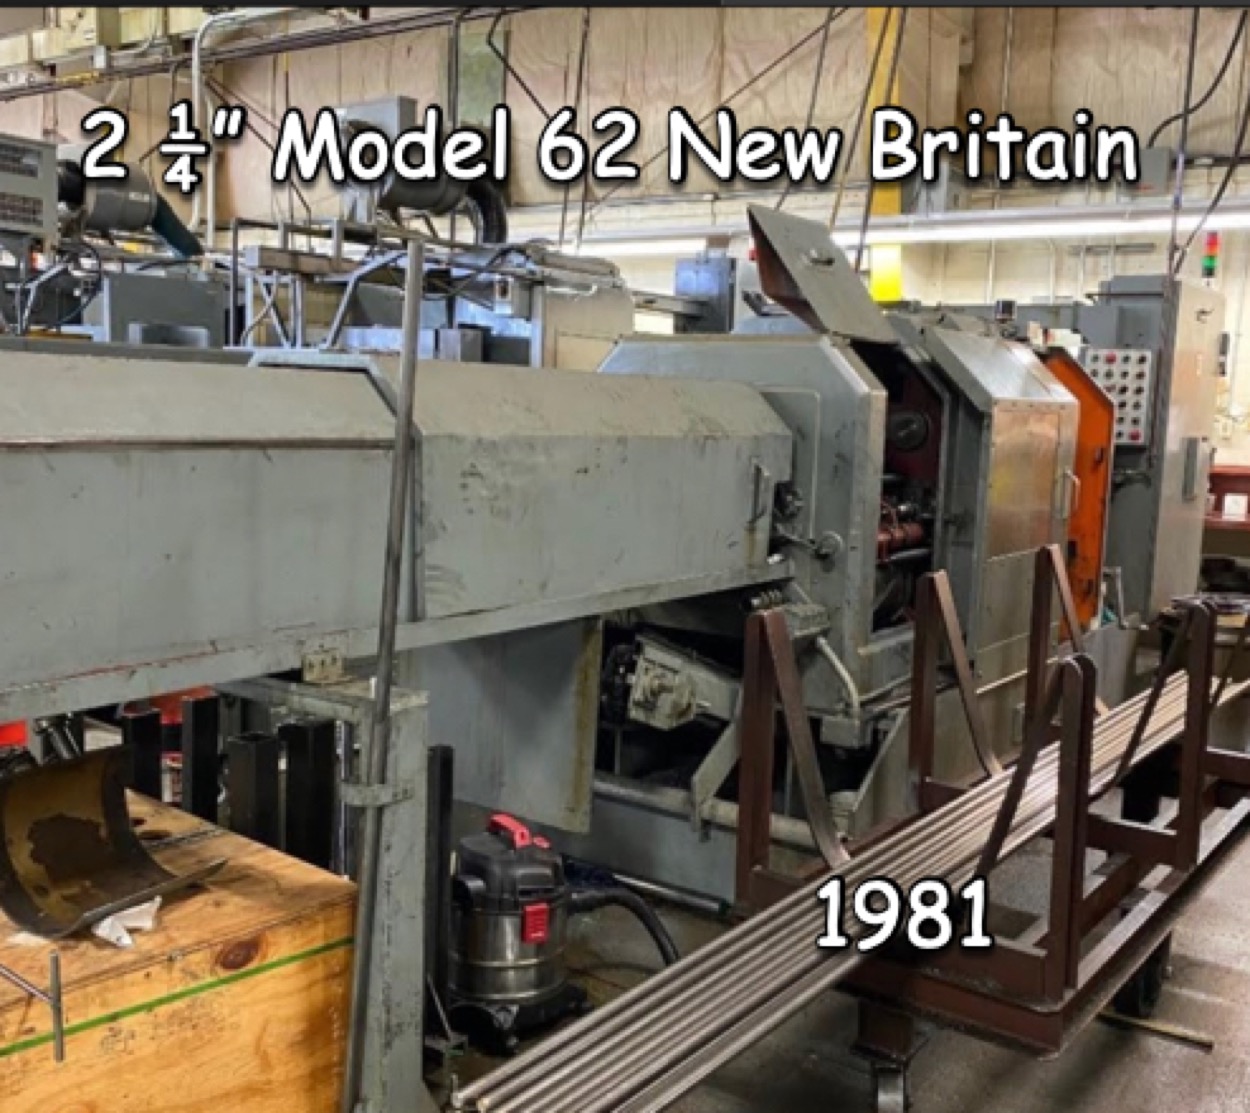  New Britain Model 62 Multi Spindle Bar 6 Spindle 1982